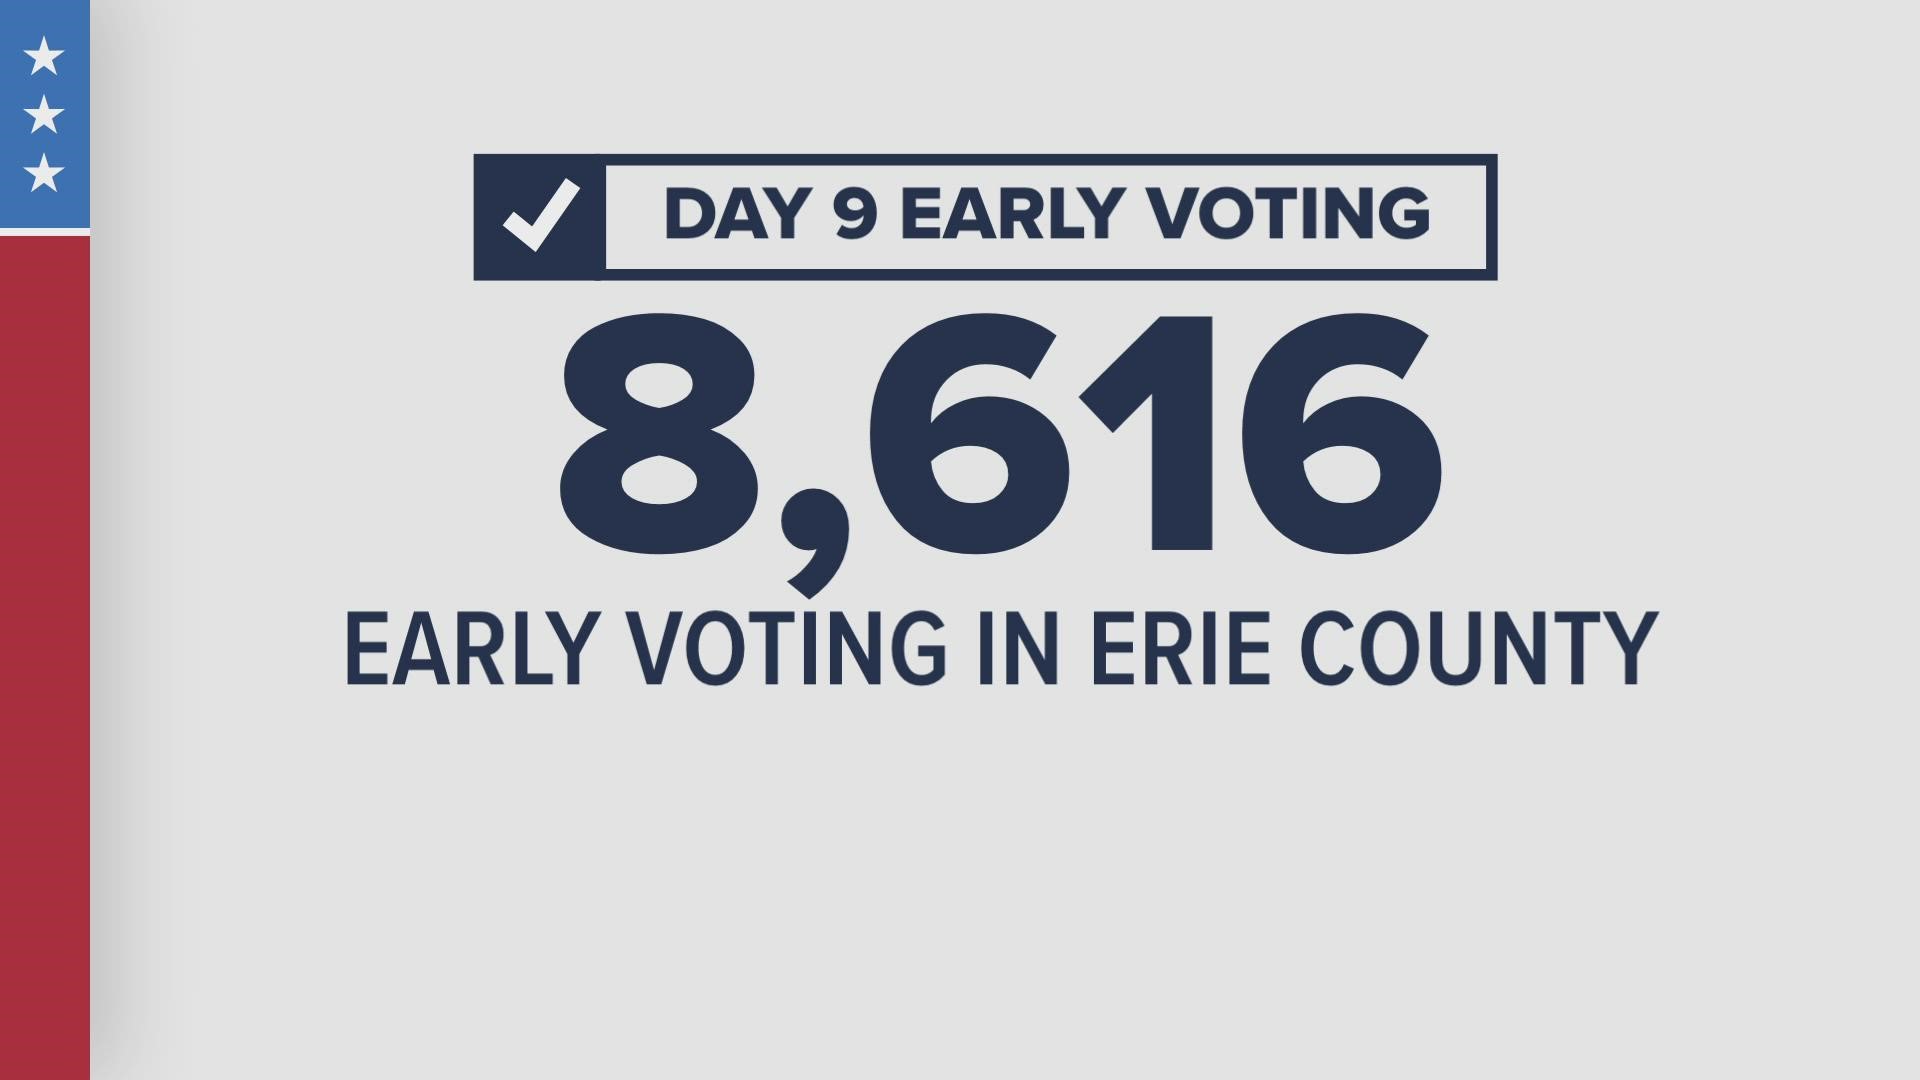 On the ninth and final day of early voting, 8,616 votes were cast.